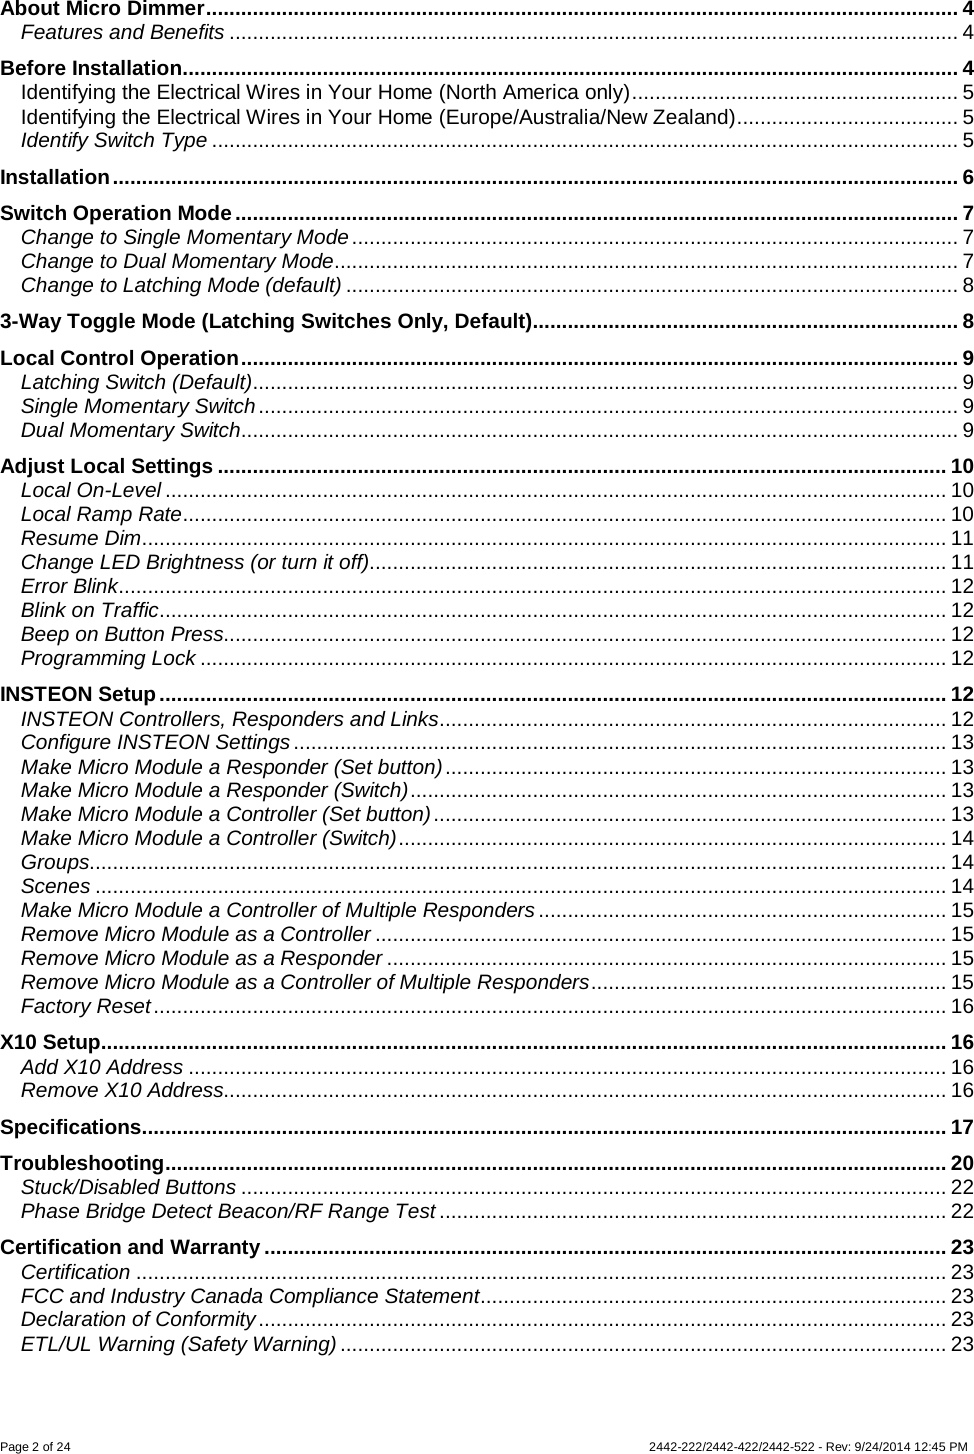 Page 2 of 24        2442-222/2442-422/2442-522 - Rev: 9/24/2014 12:45 PM About Micro Dimmer ................................................................................................................................. 4 Features and Benefits ............................................................................................................................. 4 Before Installation ..................................................................................................................................... 4 Identifying the Electrical Wires in Your Home (North America only) ........................................................ 5 Identifying the Electrical Wires in Your Home (Europe/Australia/New Zealand) ...................................... 5 Identify Switch Type ................................................................................................................................ 5 Installation ................................................................................................................................................. 6 Switch Operation Mode ............................................................................................................................ 7 Change to Single Momentary Mode ........................................................................................................ 7 Change to Dual Momentary Mode ........................................................................................................... 7 Change to Latching Mode (default) ......................................................................................................... 8 3-Way Toggle Mode (Latching Switches Only, Default)......................................................................... 8 Local Control Operation ........................................................................................................................... 9 Latching Switch (Default)......................................................................................................................... 9 Single Momentary Switch ........................................................................................................................ 9 Dual Momentary Switch........................................................................................................................... 9 Adjust Local Settings ............................................................................................................................. 10 Local On-Level ...................................................................................................................................... 10 Local Ramp Rate ................................................................................................................................... 10 Resume Dim .......................................................................................................................................... 11 Change LED Brightness (or turn it off)................................................................................................... 11 Error Blink .............................................................................................................................................. 12 Blink on Traffic ....................................................................................................................................... 12 Beep on Button Press............................................................................................................................ 12 Programming Lock ................................................................................................................................ 12 INSTEON Setup ....................................................................................................................................... 12 INSTEON Controllers, Responders and Links ....................................................................................... 12 Configure INSTEON Settings ................................................................................................................ 13 Make Micro Module a Responder (Set button) ...................................................................................... 13 Make Micro Module a Responder (Switch) ............................................................................................ 13 Make Micro Module a Controller (Set button) ........................................................................................ 13 Make Micro Module a Controller (Switch) .............................................................................................. 14 Groups................................................................................................................................................... 14 Scenes .................................................................................................................................................. 14 Make Micro Module a Controller of Multiple Responders ...................................................................... 15 Remove Micro Module as a Controller .................................................................................................. 15 Remove Micro Module as a Responder ................................................................................................ 15 Remove Micro Module as a Controller of Multiple Responders ............................................................. 15 Factory Reset ........................................................................................................................................ 16 X10 Setup................................................................................................................................................. 16 Add X10 Address .................................................................................................................................. 16 Remove X10 Address............................................................................................................................ 16 Specifications .......................................................................................................................................... 17 Troubleshooting ...................................................................................................................................... 20 Stuck/Disabled Buttons ......................................................................................................................... 22 Phase Bridge Detect Beacon/RF Range Test ....................................................................................... 22 Certification and Warranty ..................................................................................................................... 23 Certification ........................................................................................................................................... 23 FCC and Industry Canada Compliance Statement ................................................................................ 23 Declaration of Conformity ...................................................................................................................... 23 ETL/UL Warning (Safety Warning) ........................................................................................................ 23 